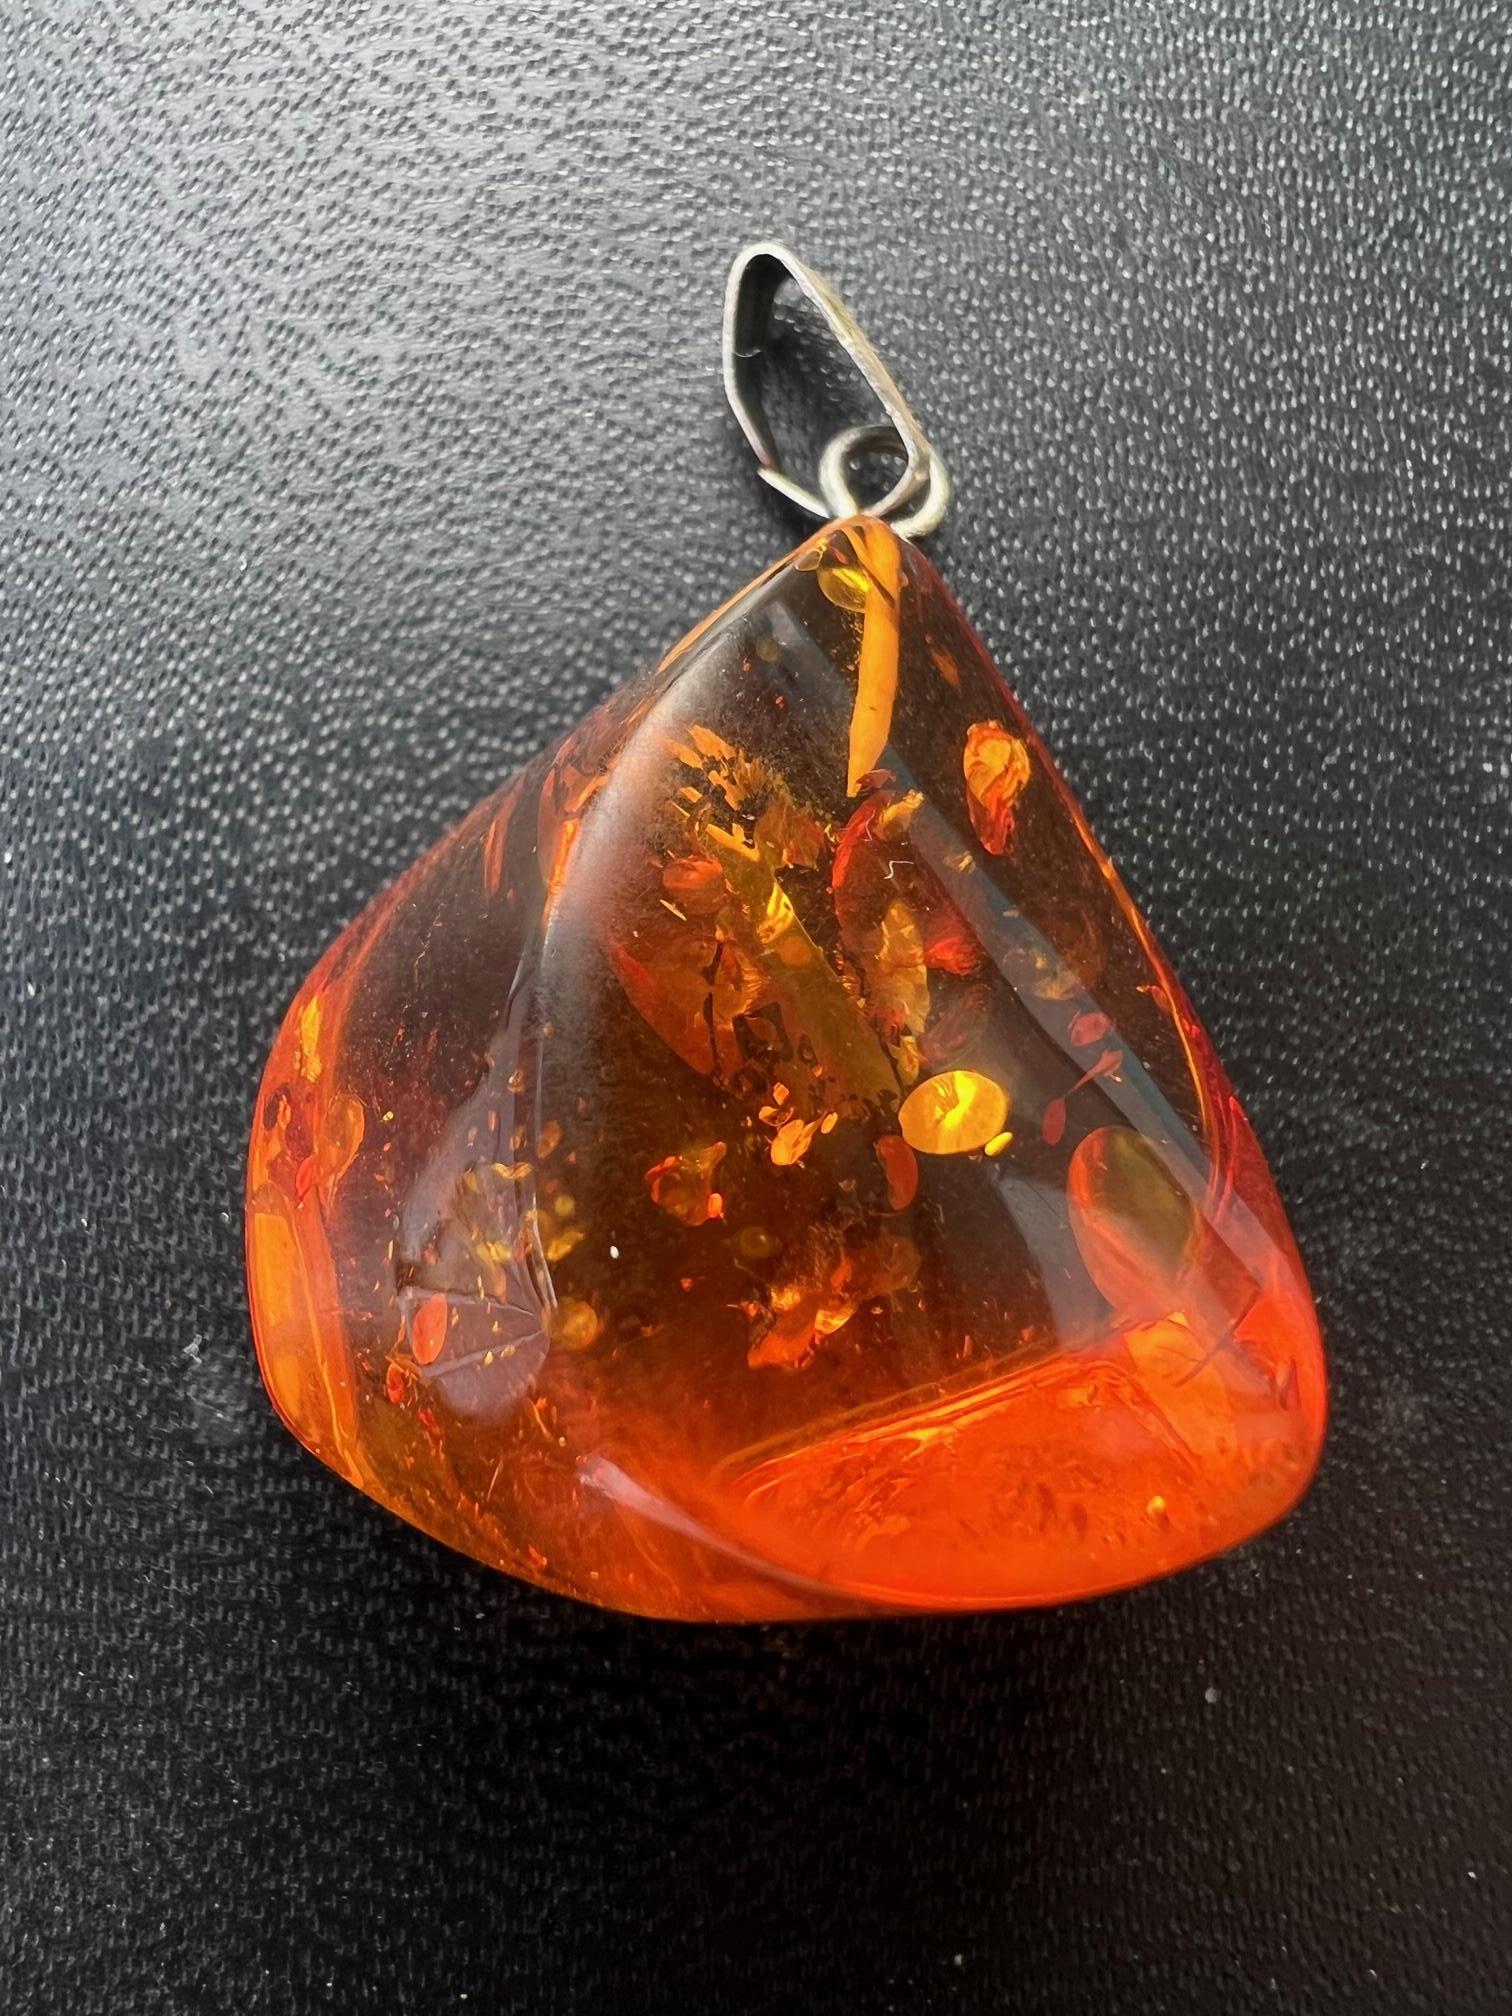 Baltic amber, also known as 